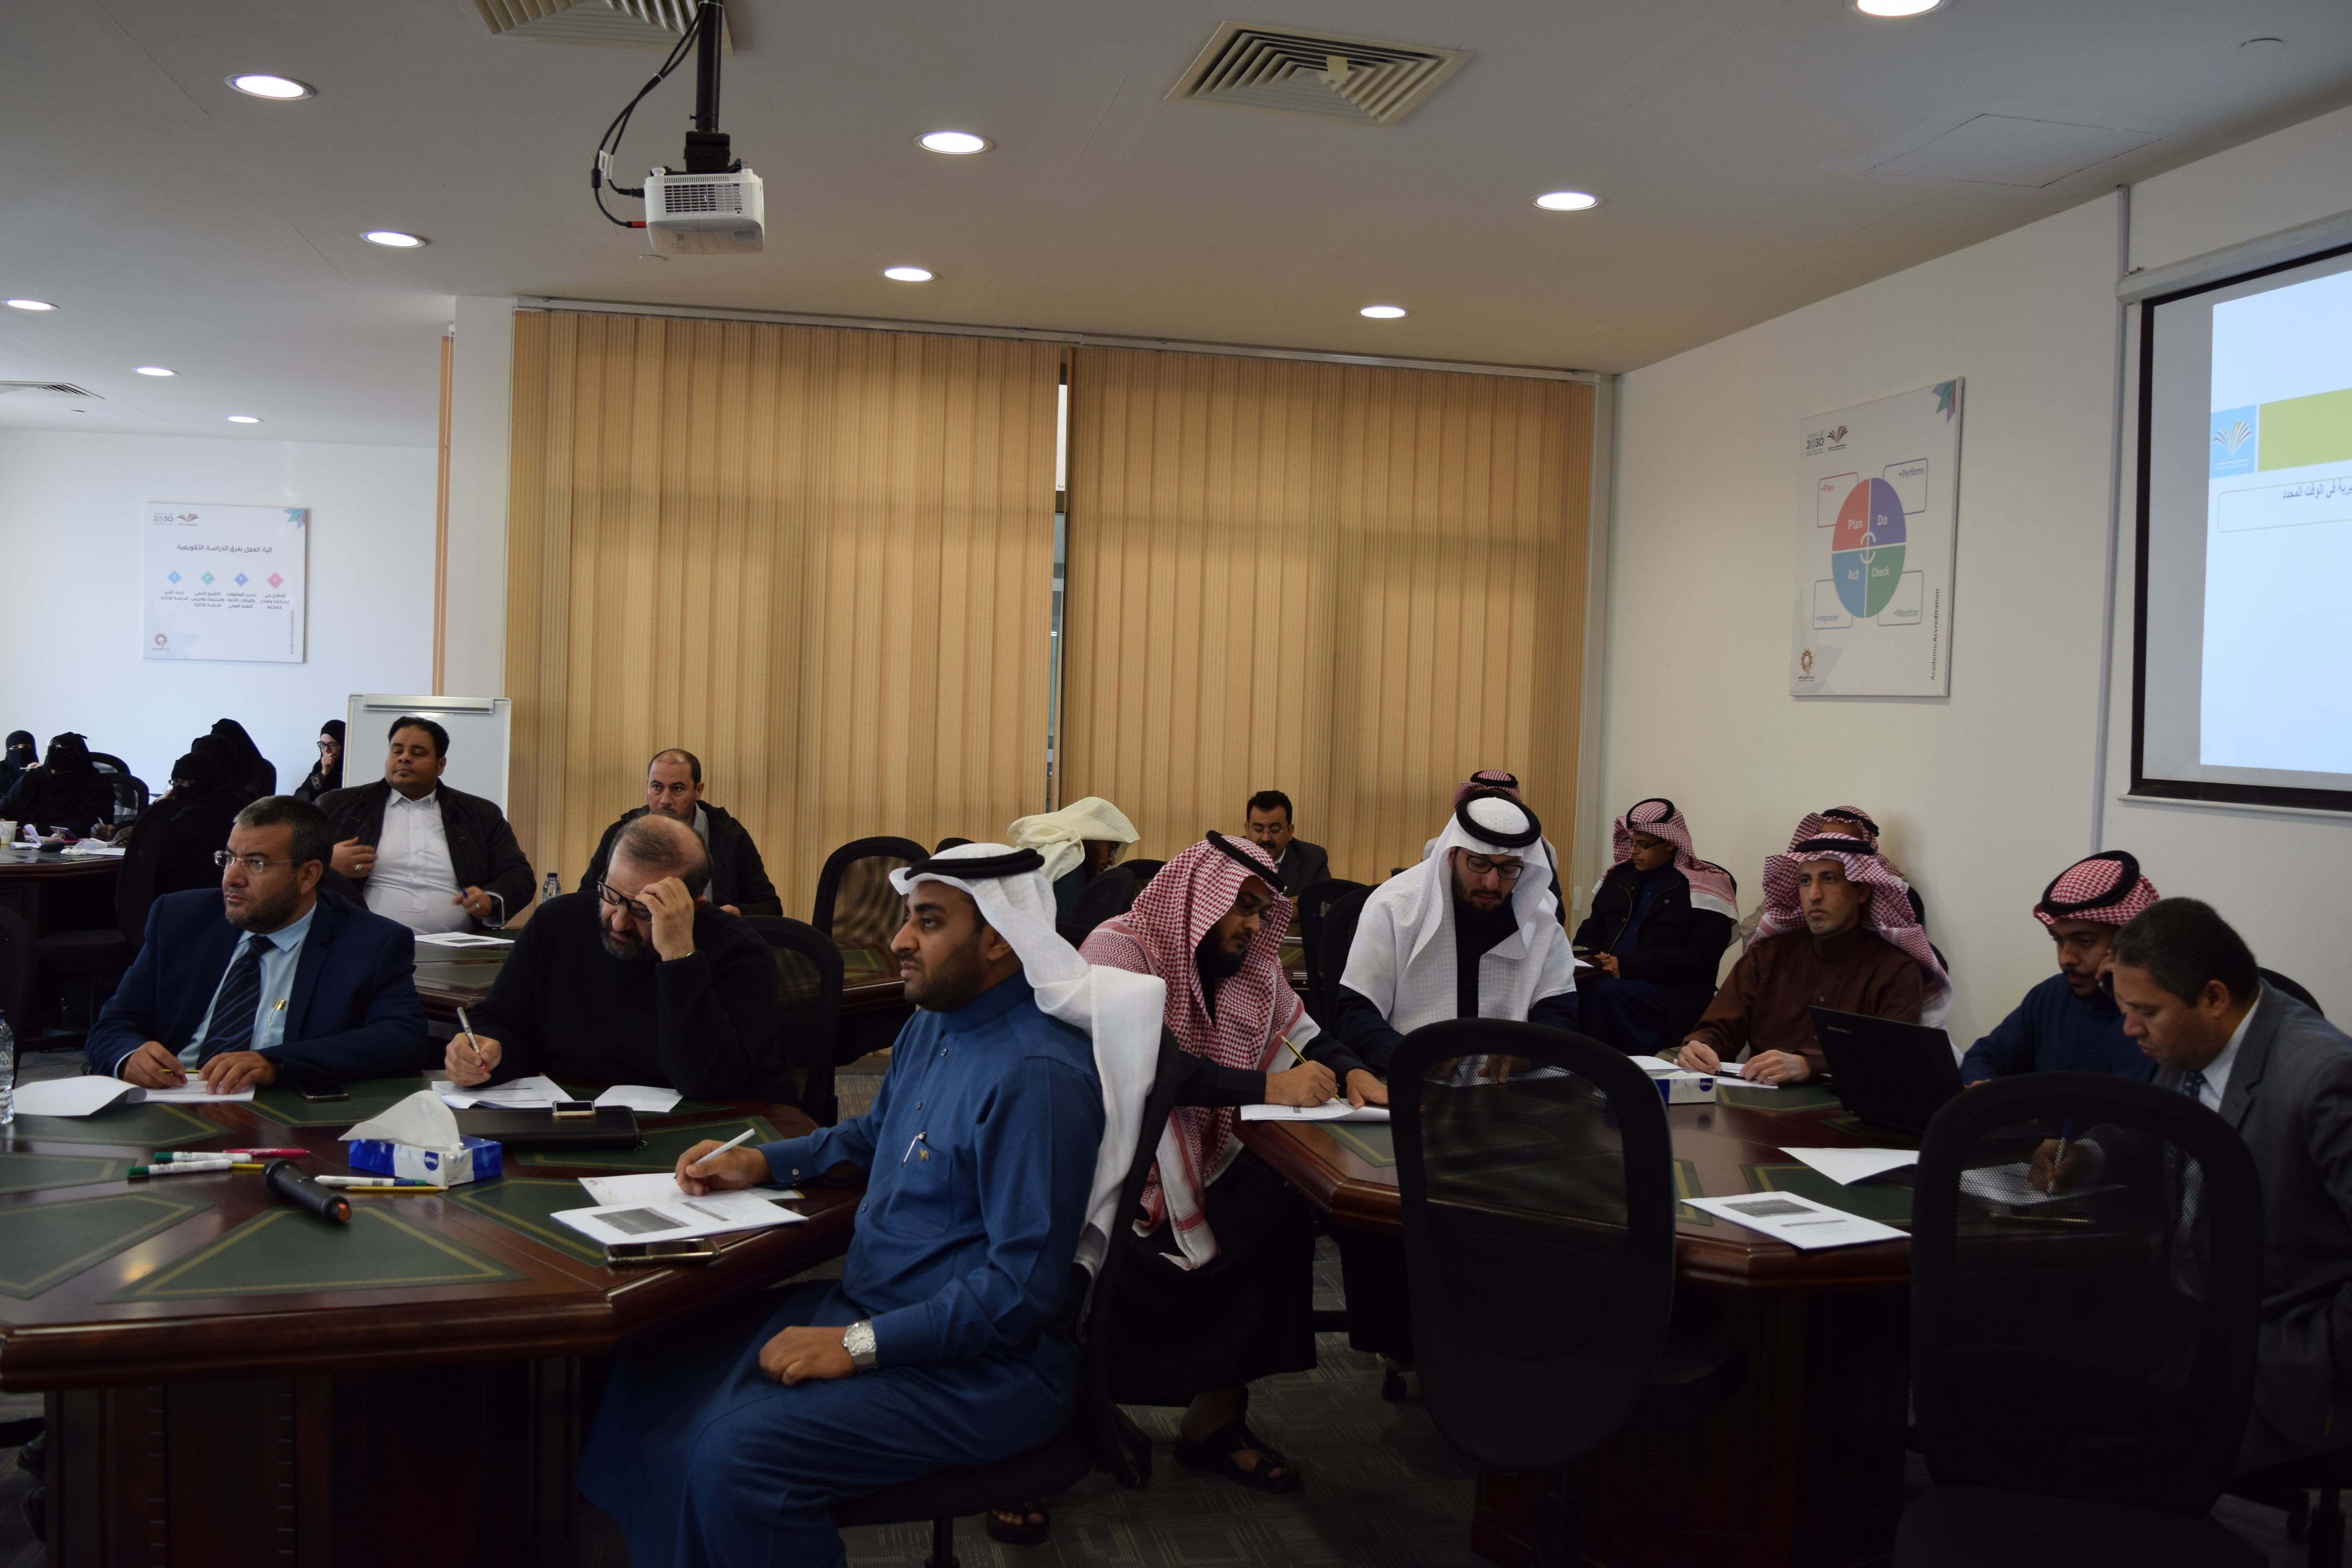 The Deanship of Development and Quality organized a workshop entitled "Performance indicators and effective guidance to support the educational process"